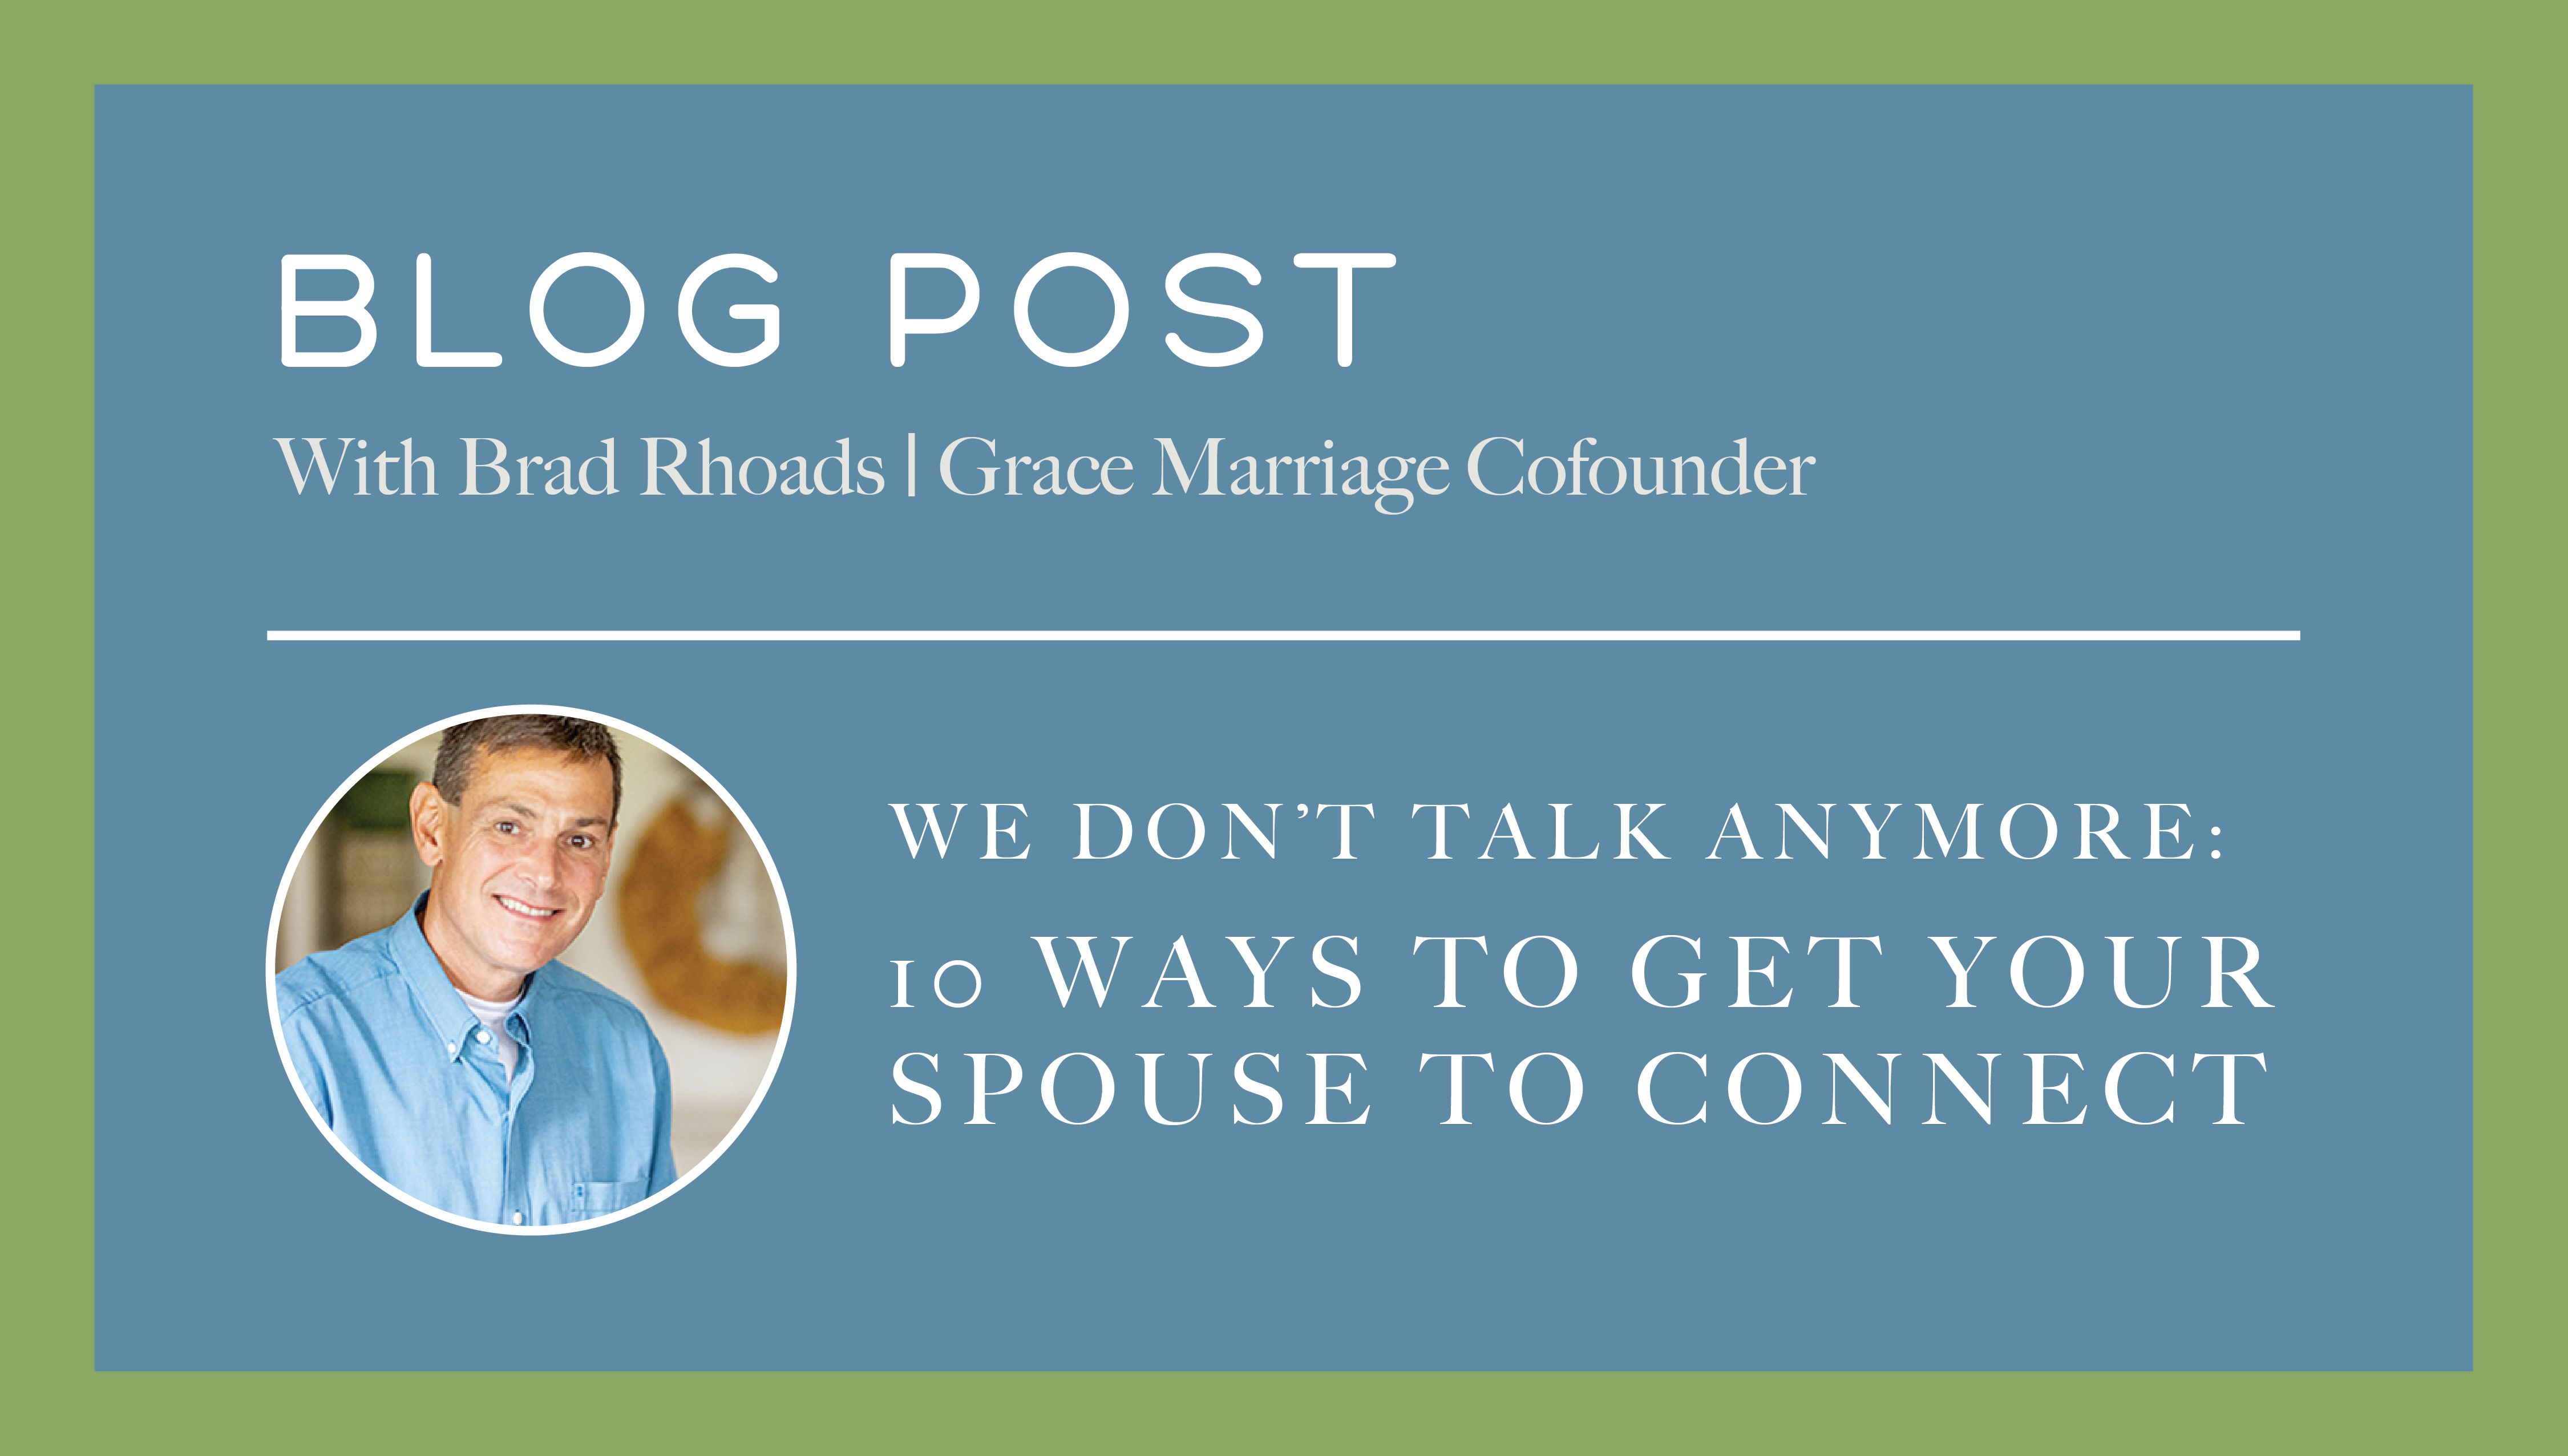 We Don’t Talk Anymore: 10 Ways To Get Your Spouse to Connect